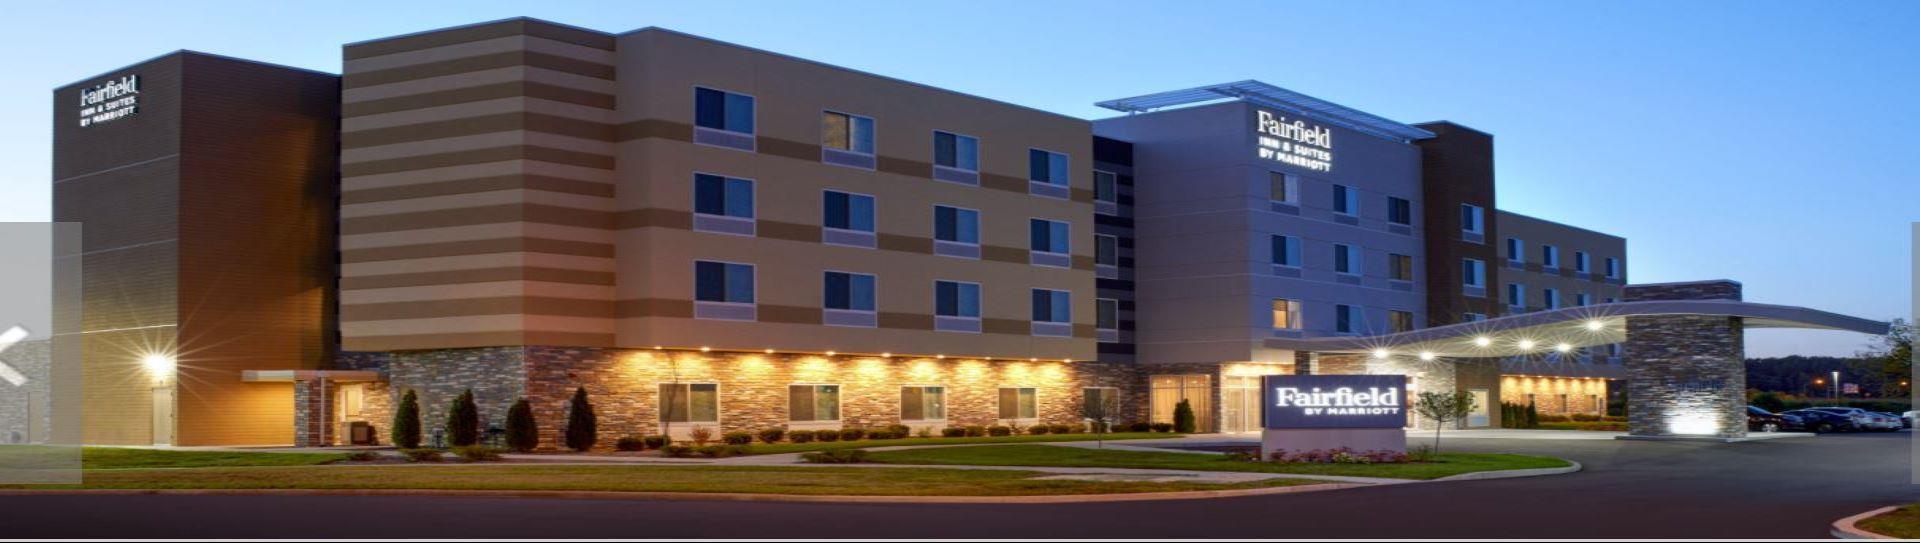 Fairfield Inn & Suites Chicago Bolingbrook in Bolingbrook, IL